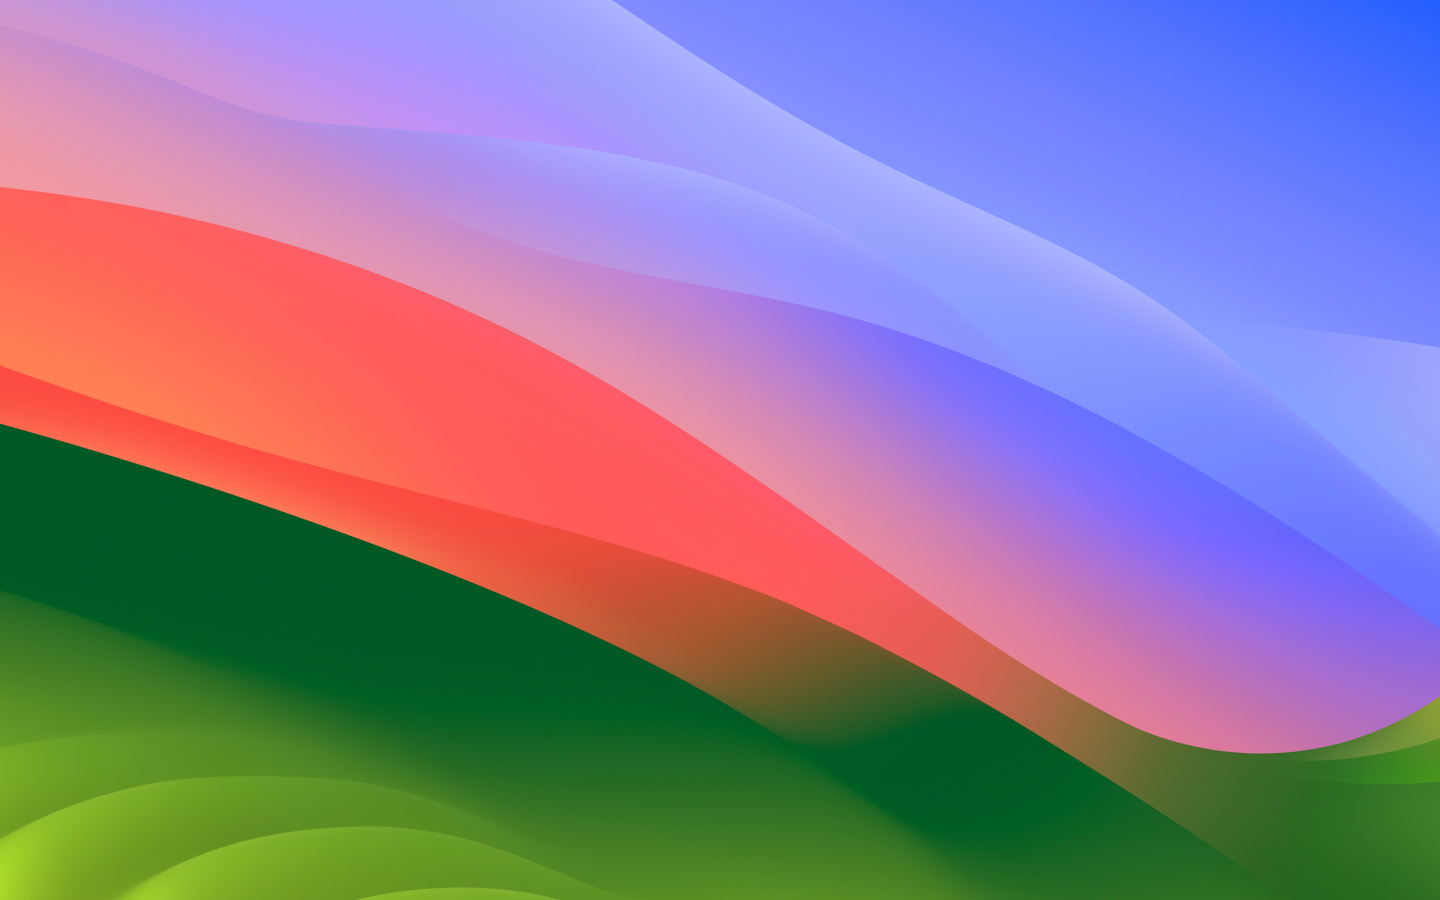 MacOS Sonoma, colorful waves, stock photo, 1440x900 wallpaper